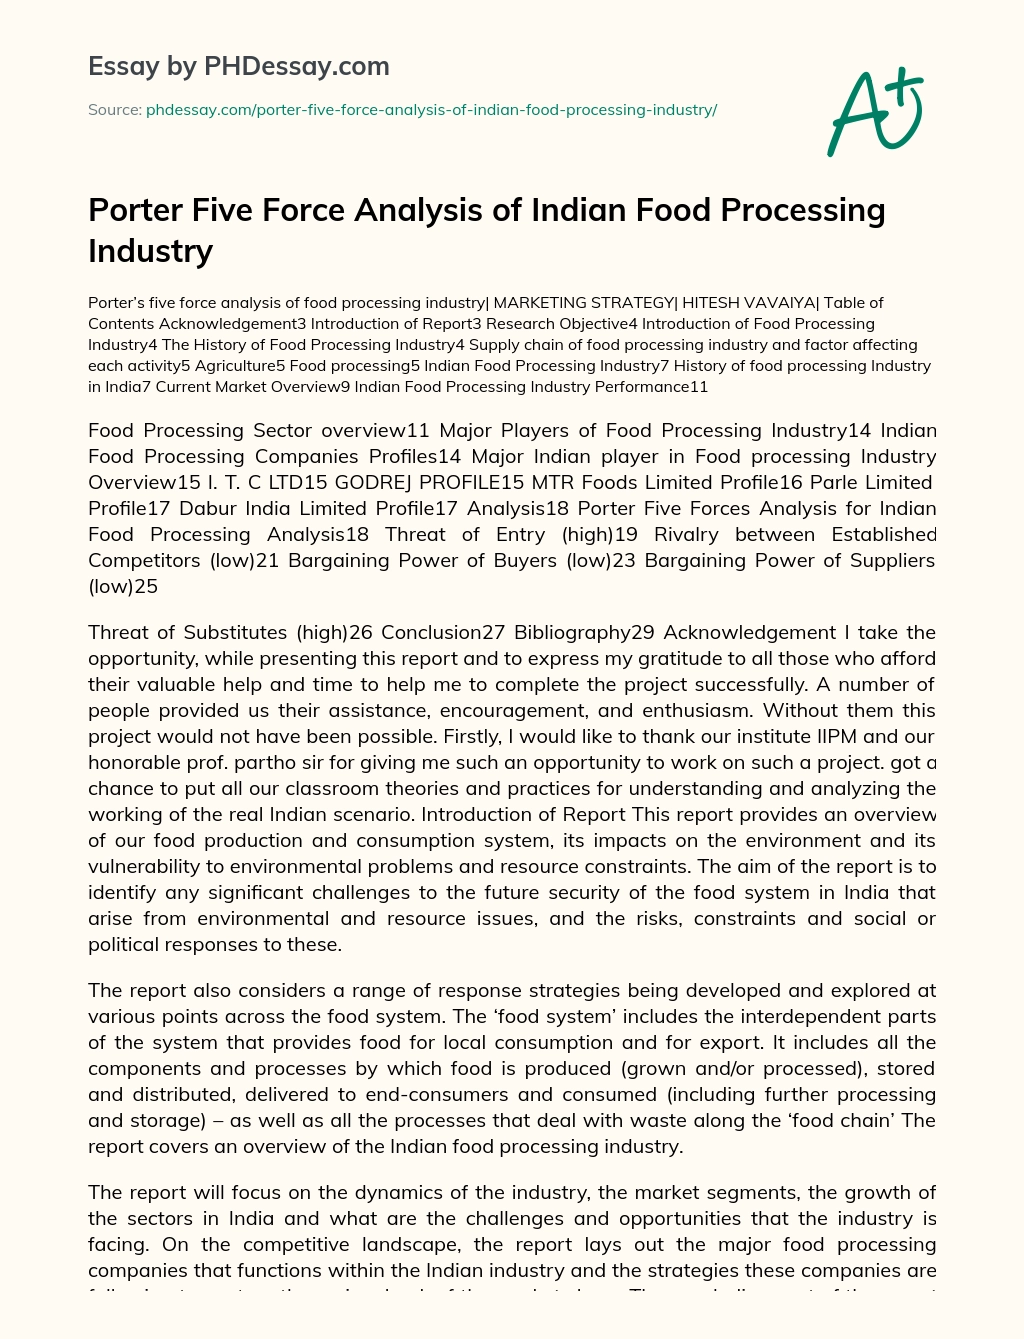 Porter Five Force Analysis of Indian Food Processing Industry essay